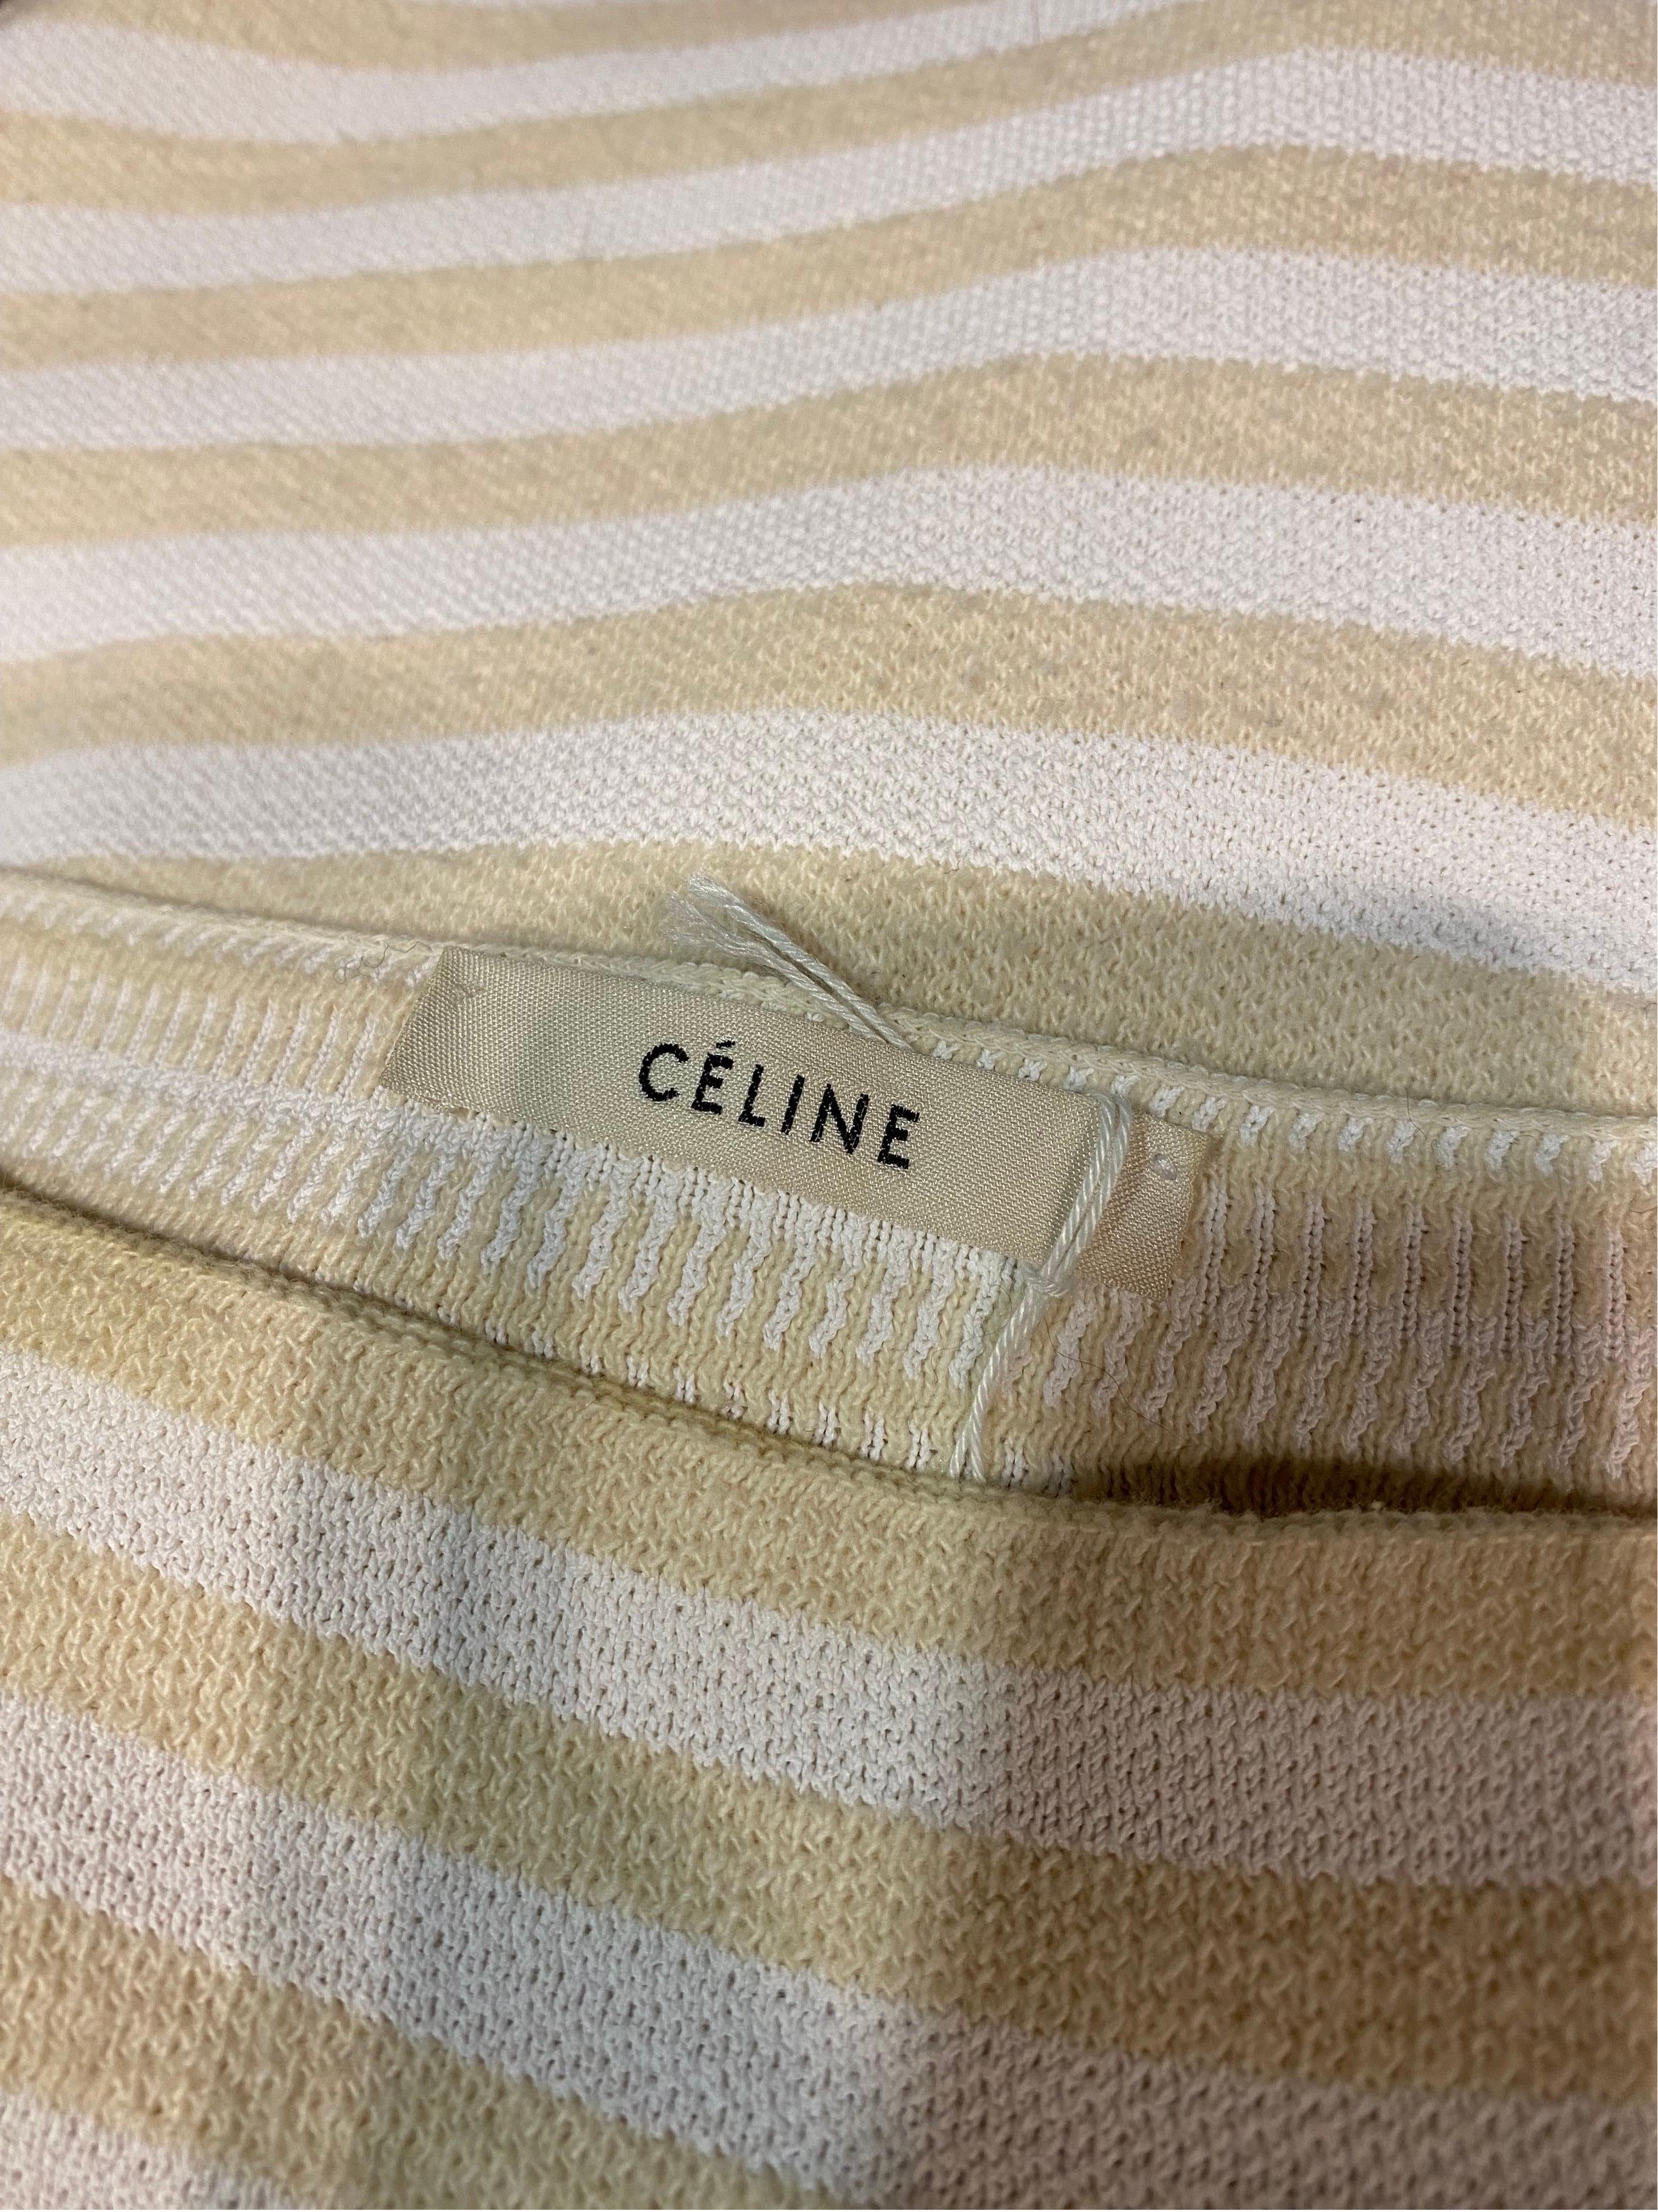 Celine beige and white stripes Sweater For Sale 4